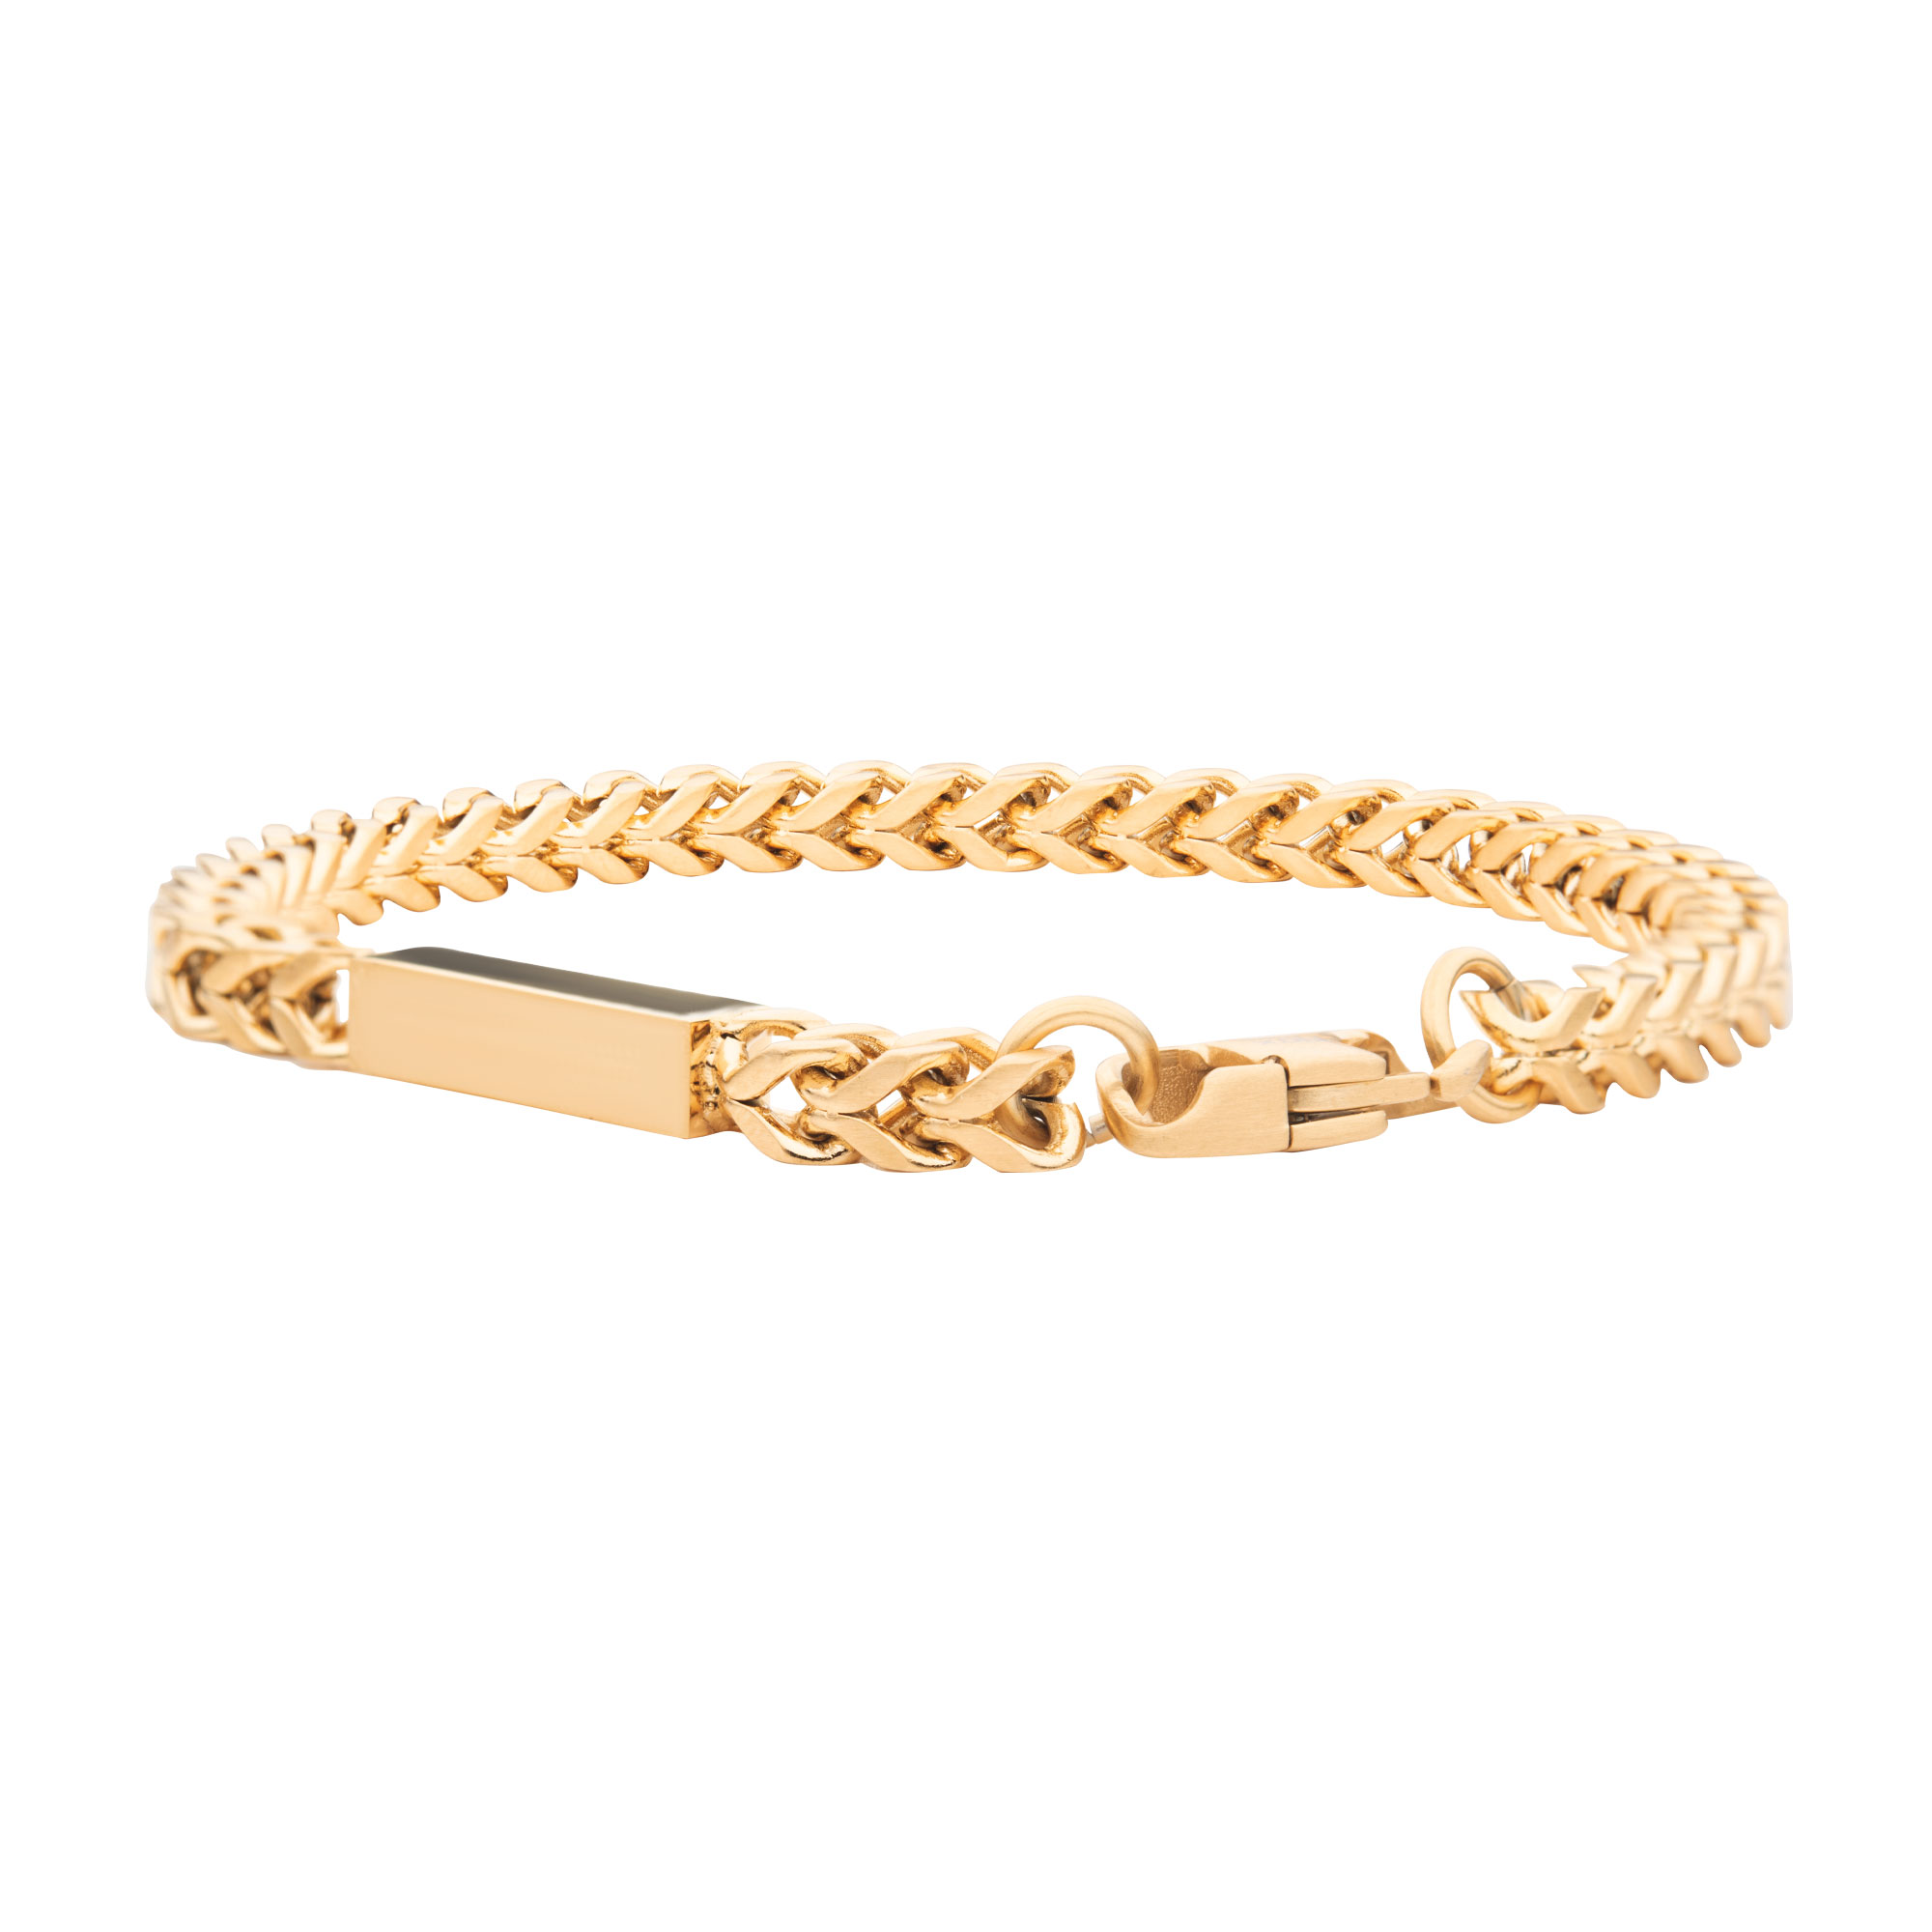 18K Gold IP Engravable ID Block with Franco Chain Bracelet Morin Jewelers Southbridge, MA